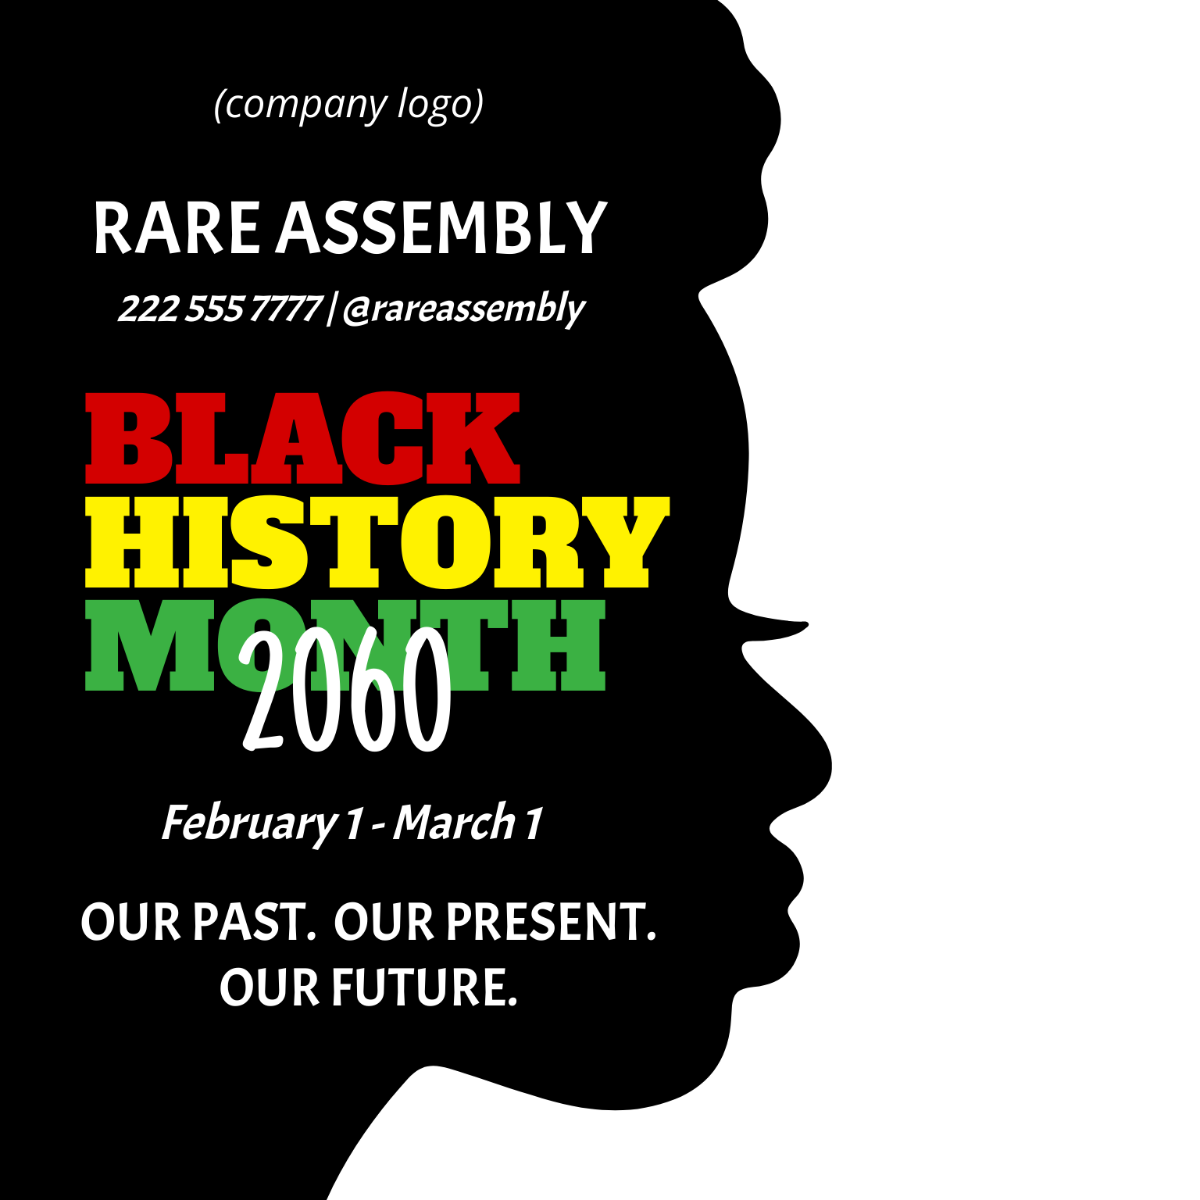 Black History Month Flyer Vector Template